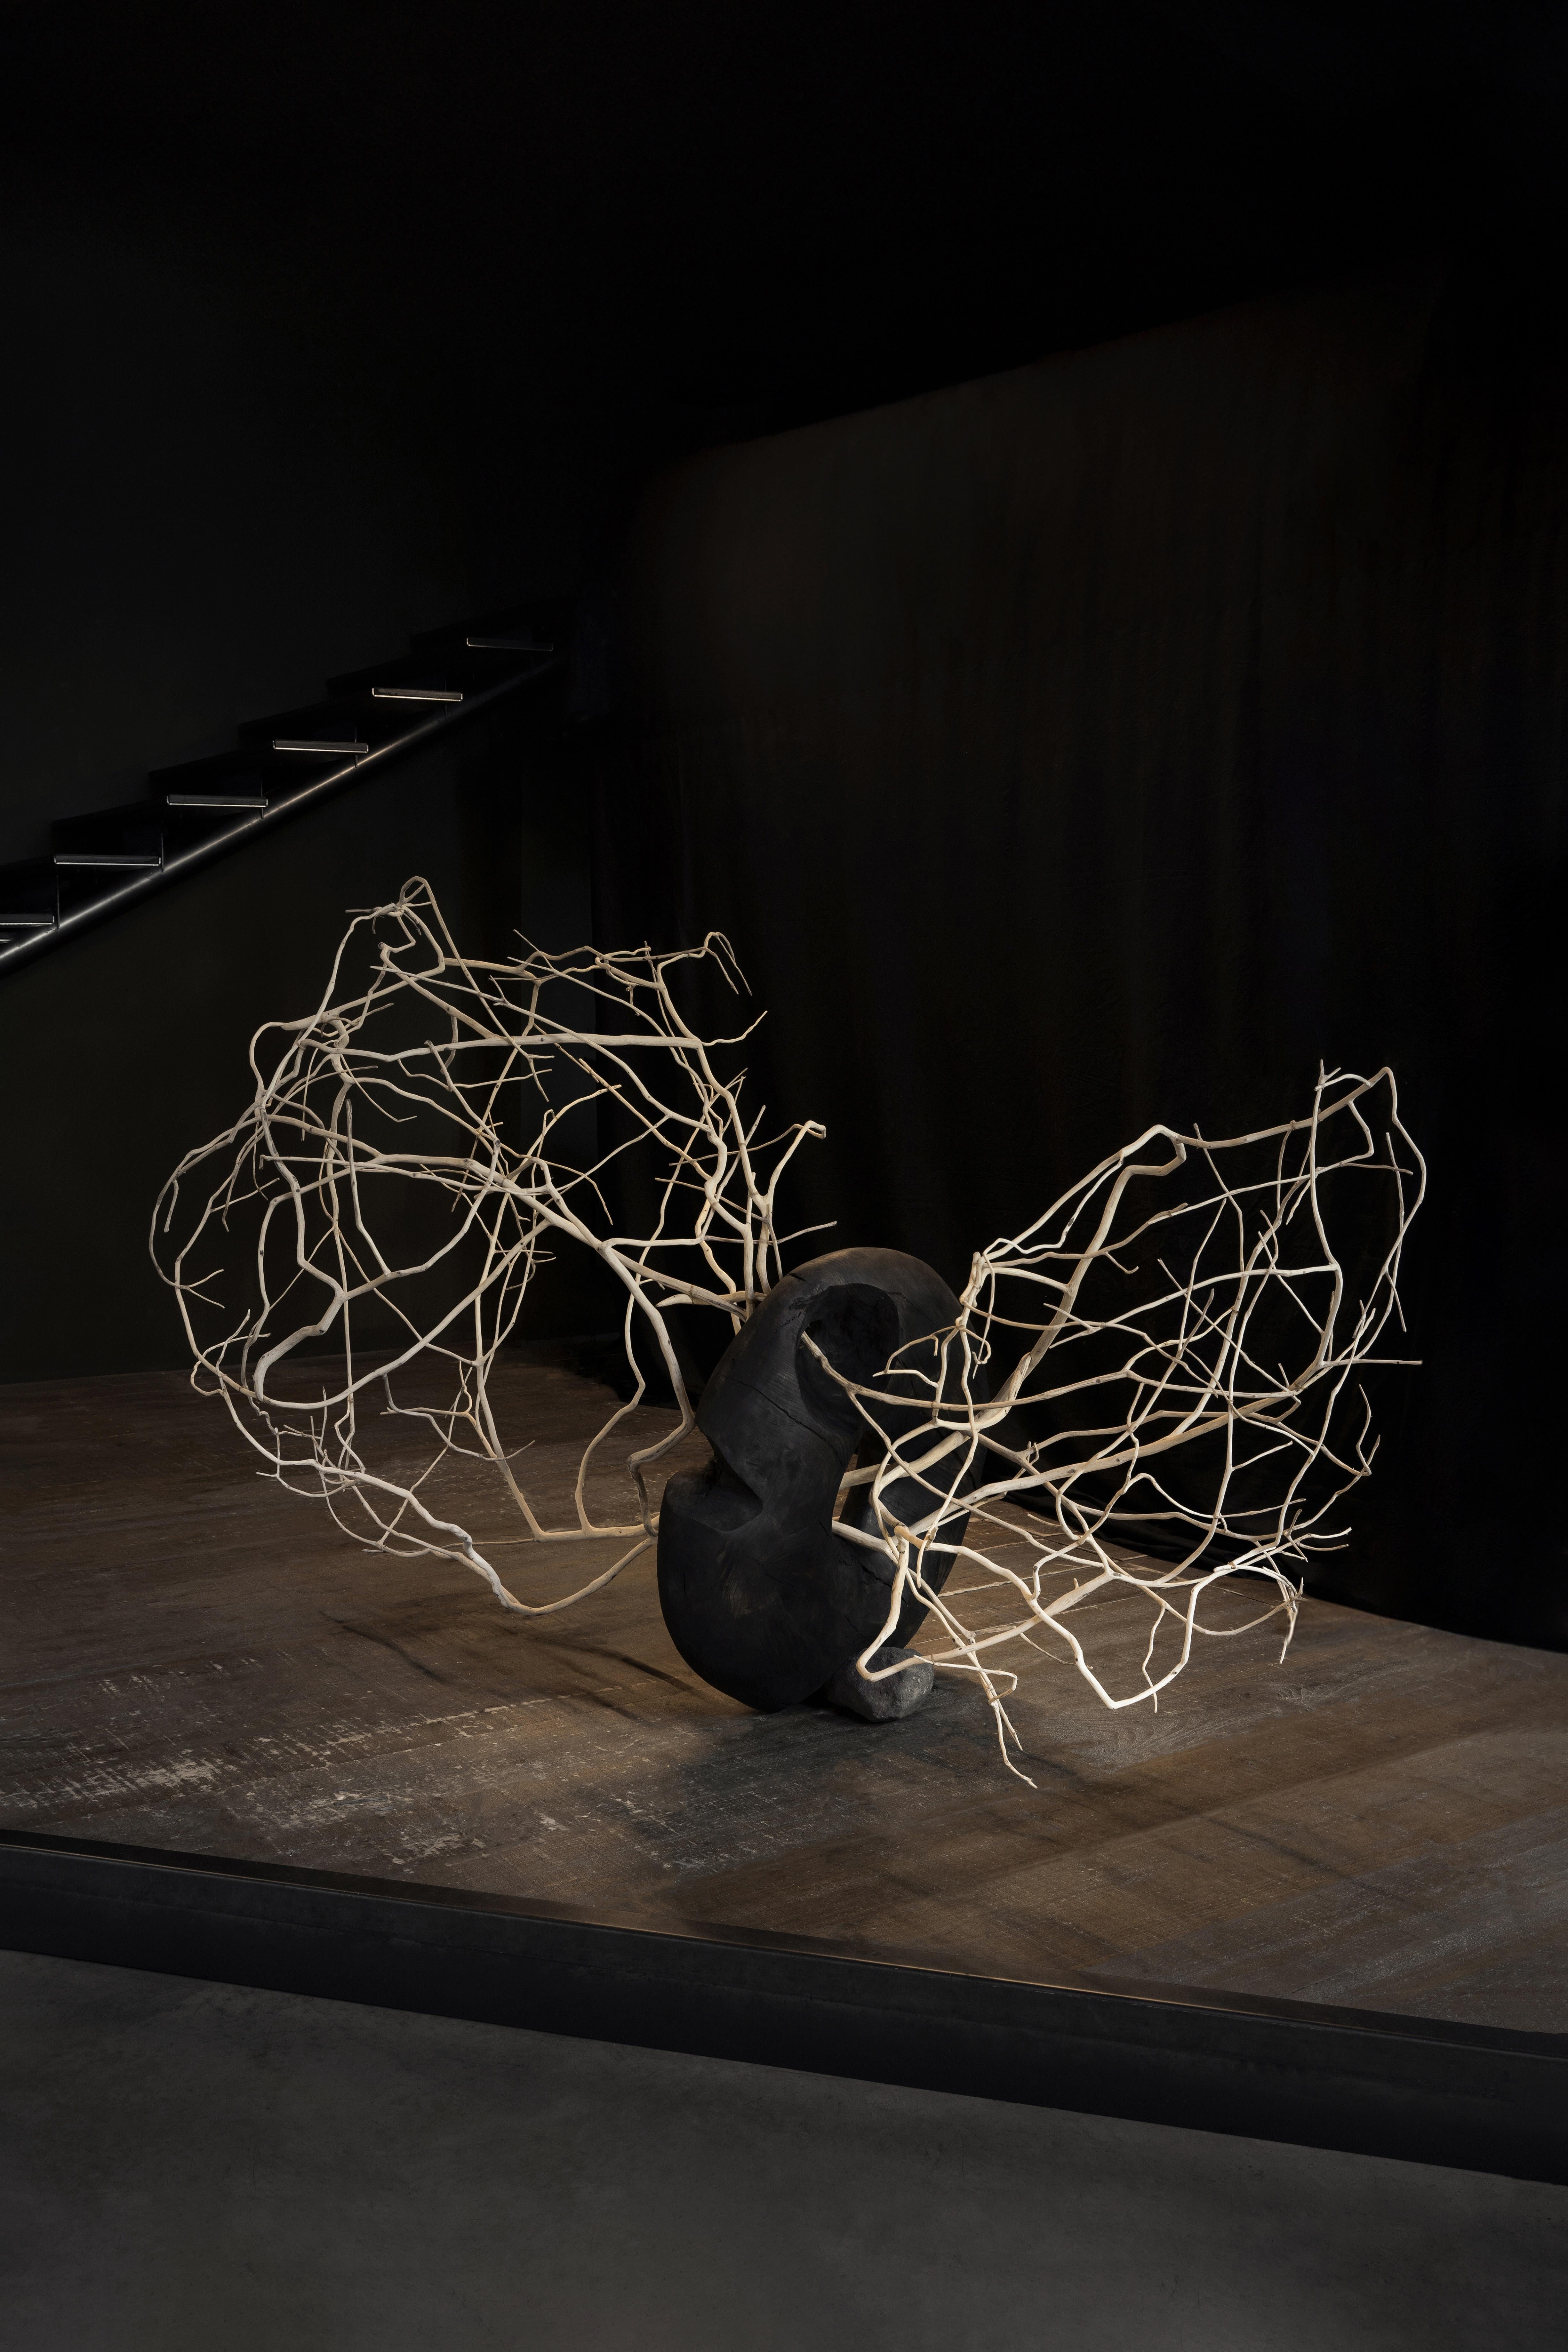 Zero Sculpture by Jérôme Pereira
Dimensions: D 80 x W 200 x H 120 cm.
Materials: Ash, oak tree


Jérôme Pereira creates lighting sculptures with a rough and gracious presence. Coming from a scientific background, his sculptures, as equations,